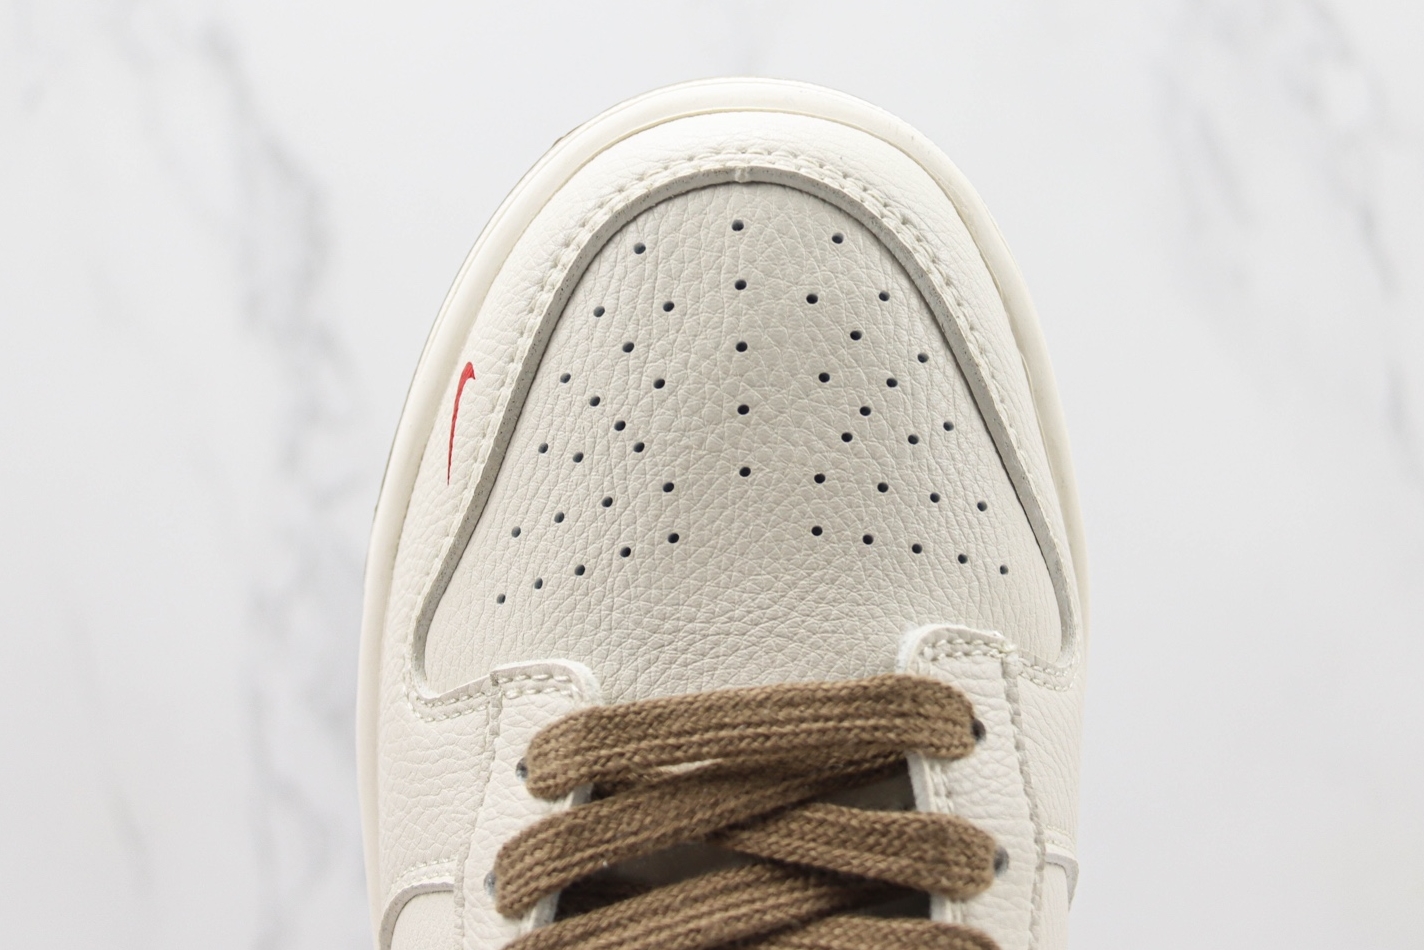 Supreme x Nike SB Dunk Low Milky White Brown Red XD6188-001 - Limited Edition Sneakers